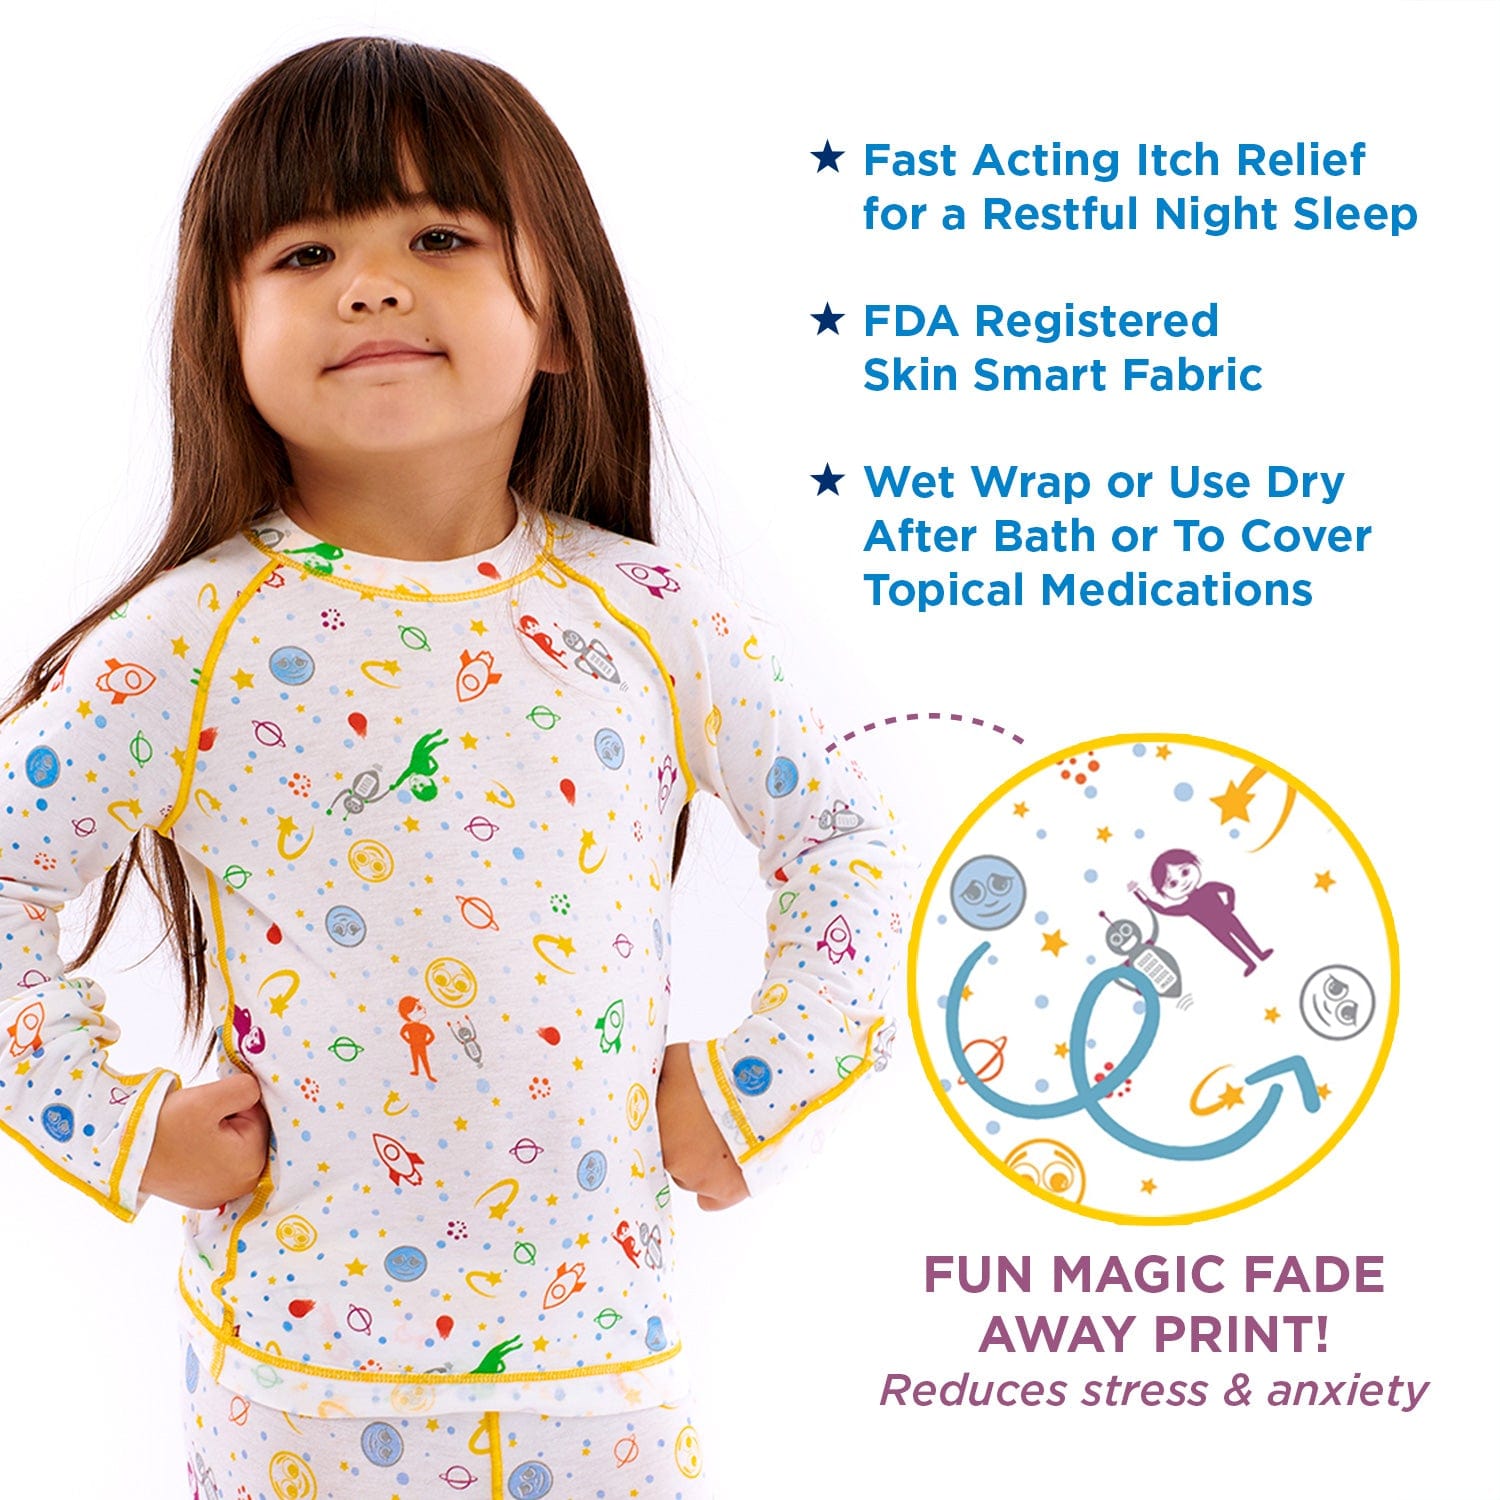 "Kids Eczema Sleepwear Shirt made from Zinc TENCEL for Wet Wrapping Therapy and Itch Relief"